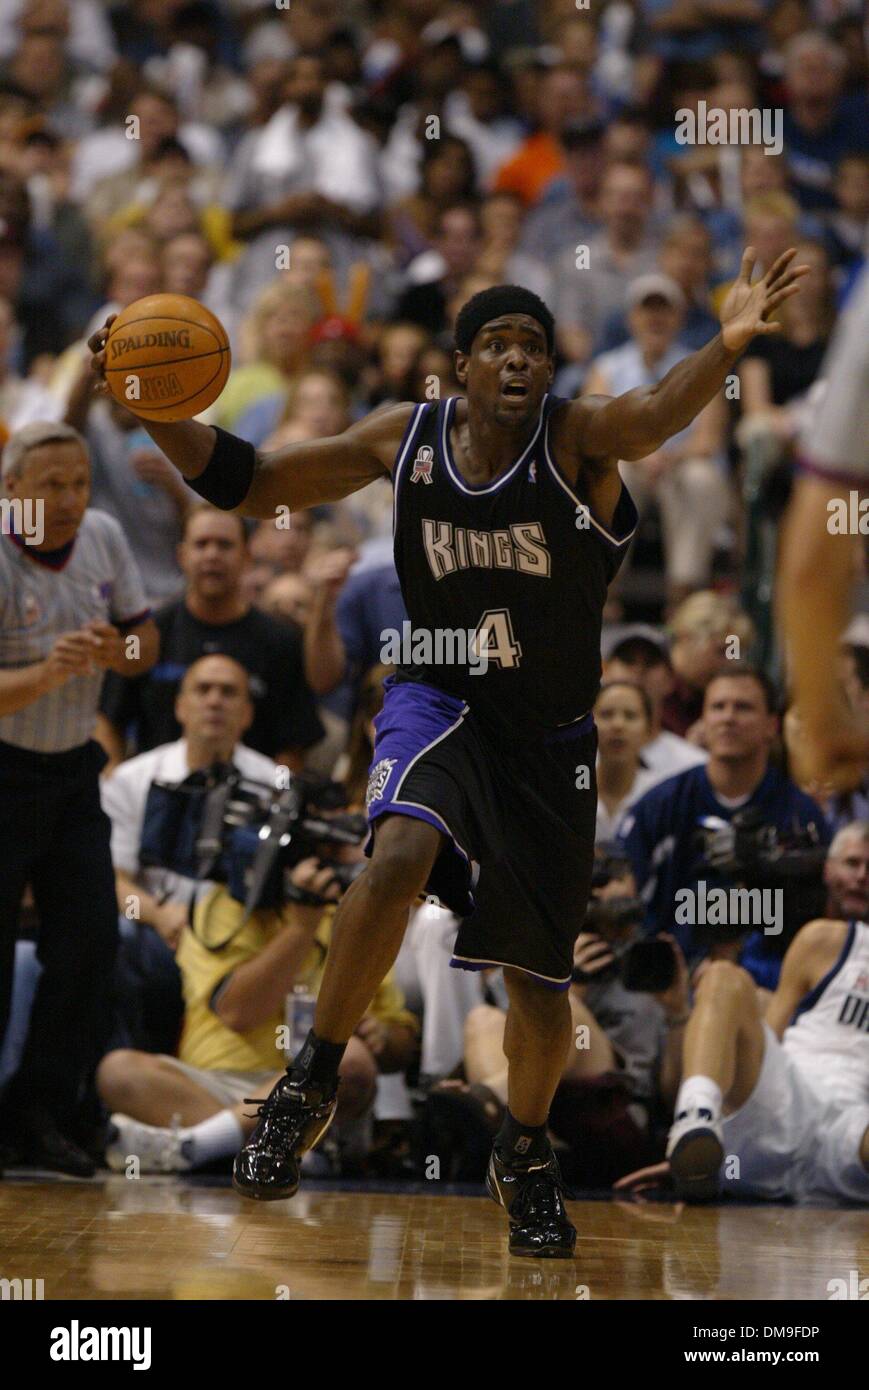 Chris Webber believes Game 6 of 2002 conference finals was fixed